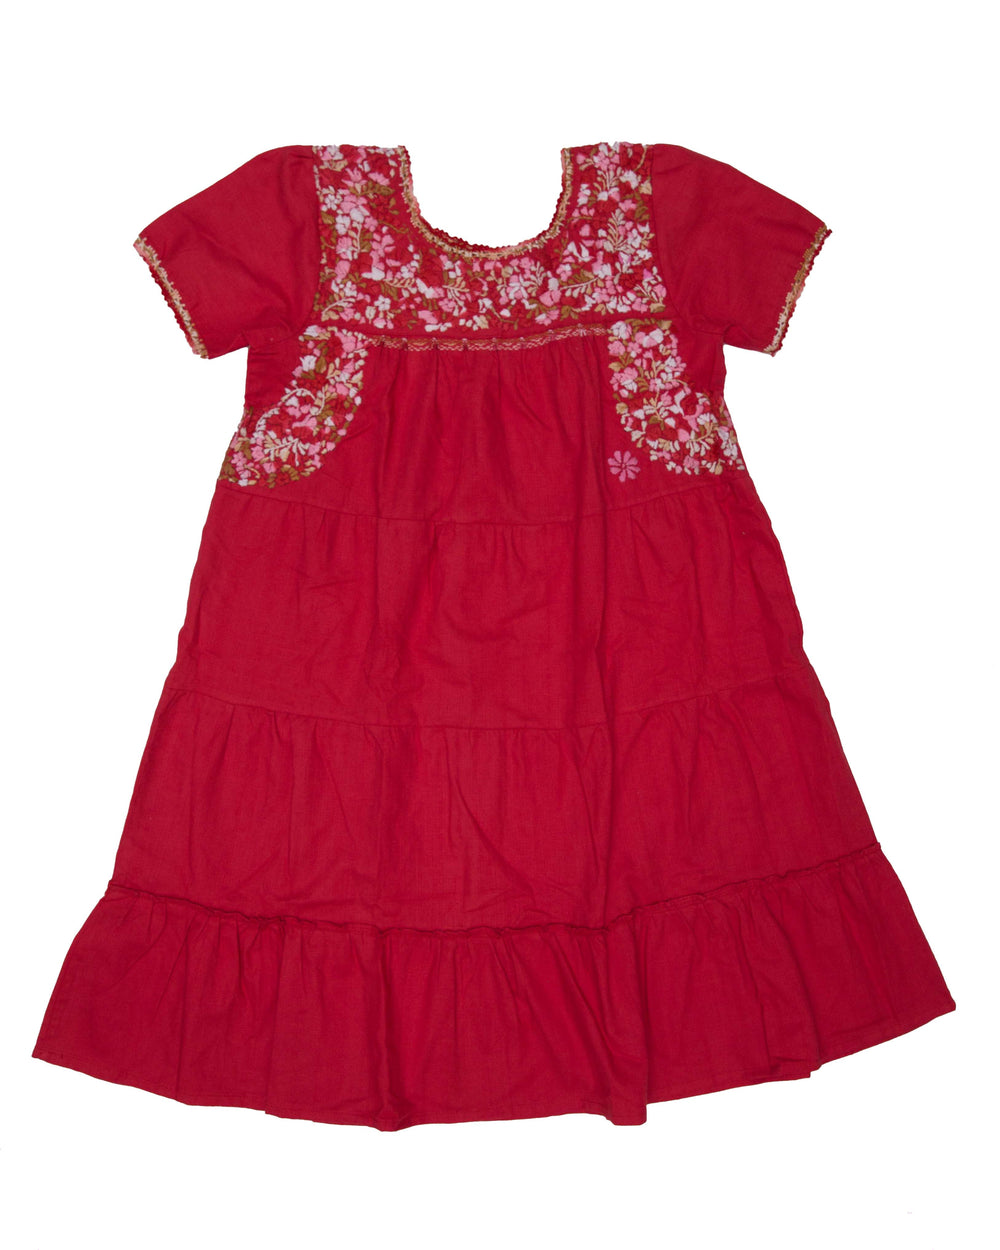 Girls Gabriela Dress | Red with Red & Tan Ombre